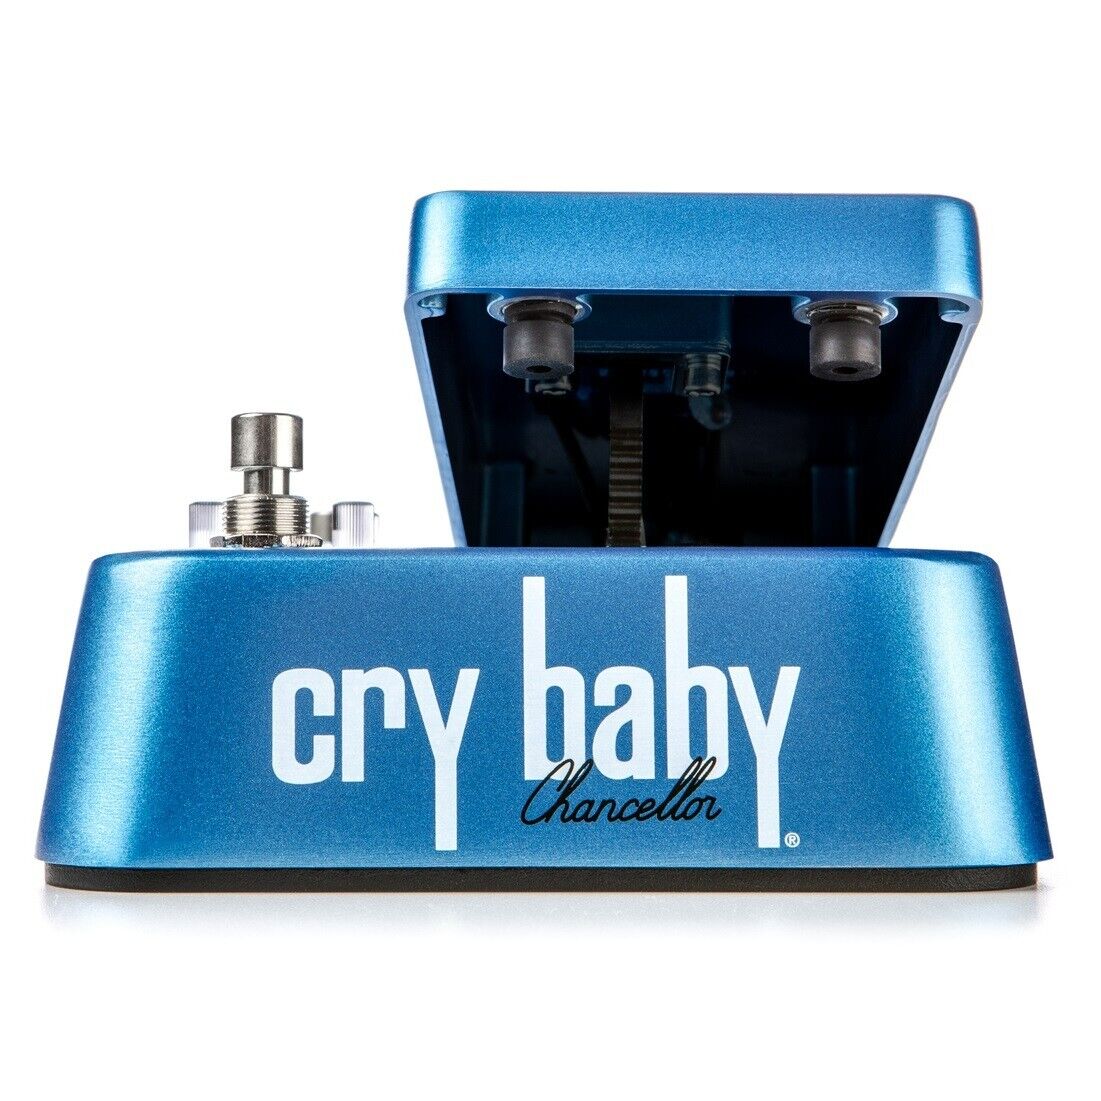 Used Dunlop JCT95 Justin Chancellor Cry Baby Wah Guitar Effects Pedal